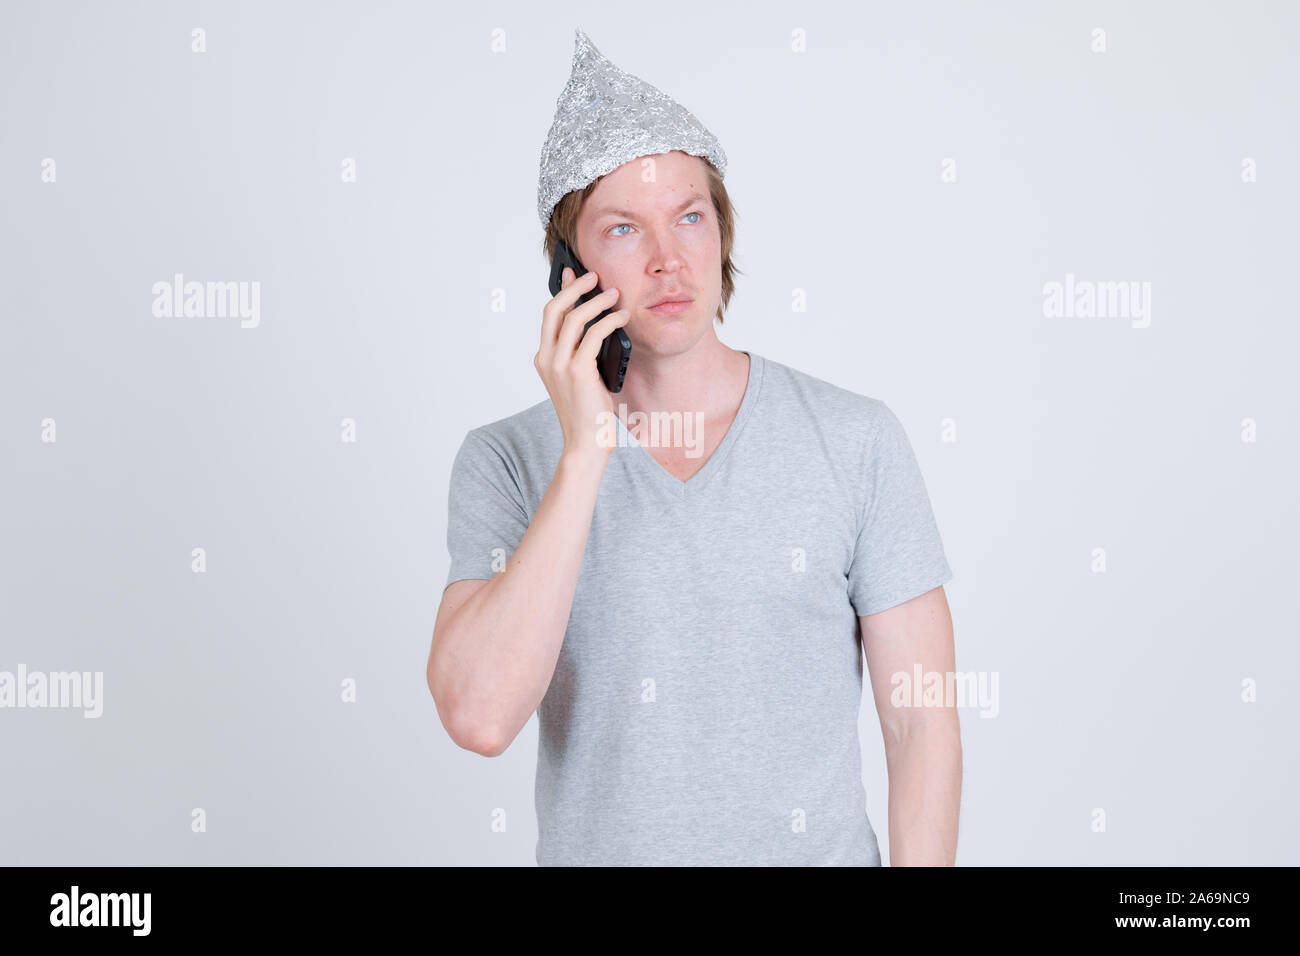 https://c8.alamy.com/comp/2A69NC9/young-man-with-tin-foil-hat-thinking-while-talking-on-the-phone-2A69NC9.jpg